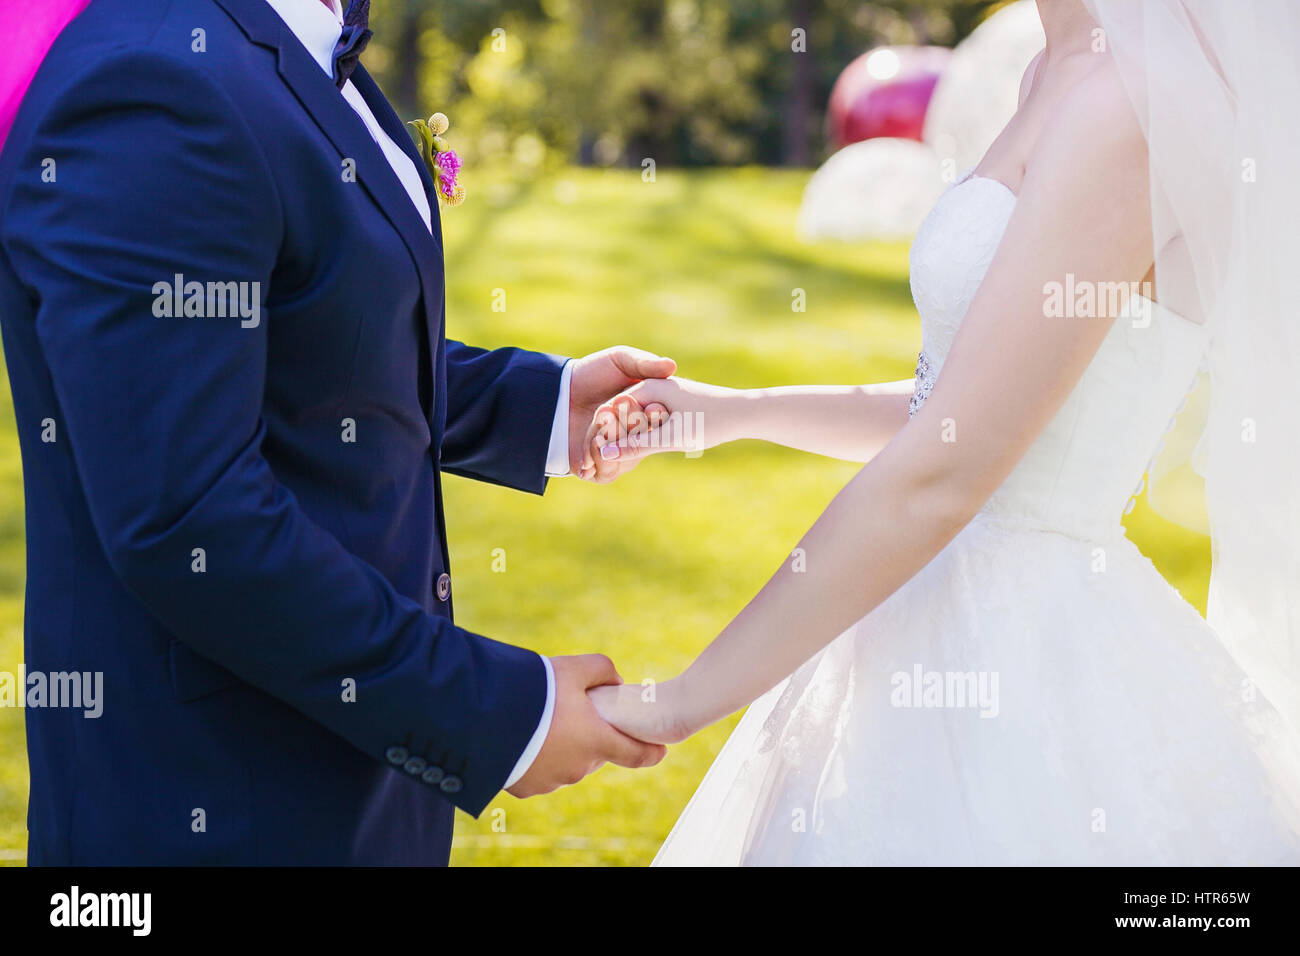 Newlyweds staying arm in arm, with wedding rings, closeup Stock Photo